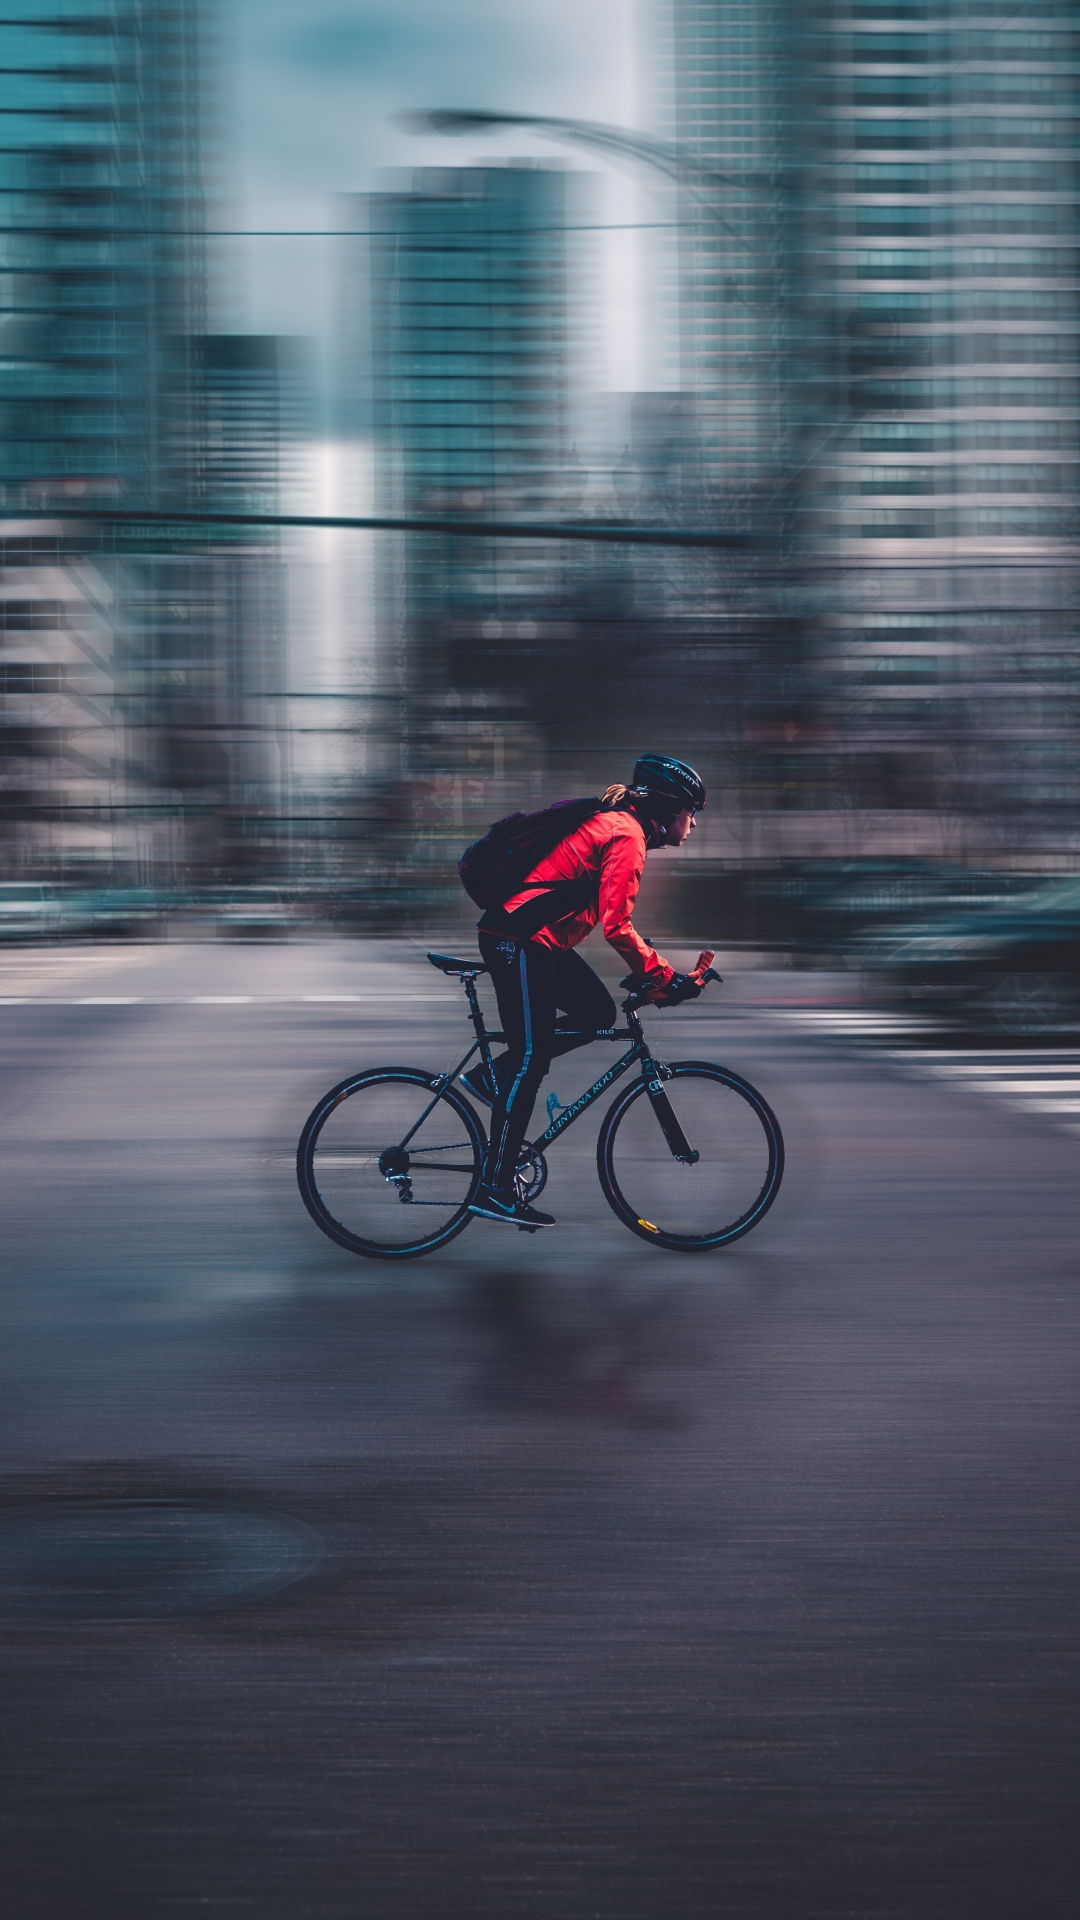 Man in Red Jacket Riding Bicycle on Road During Daytime. Wallpaper in 1080x1920 Resolution